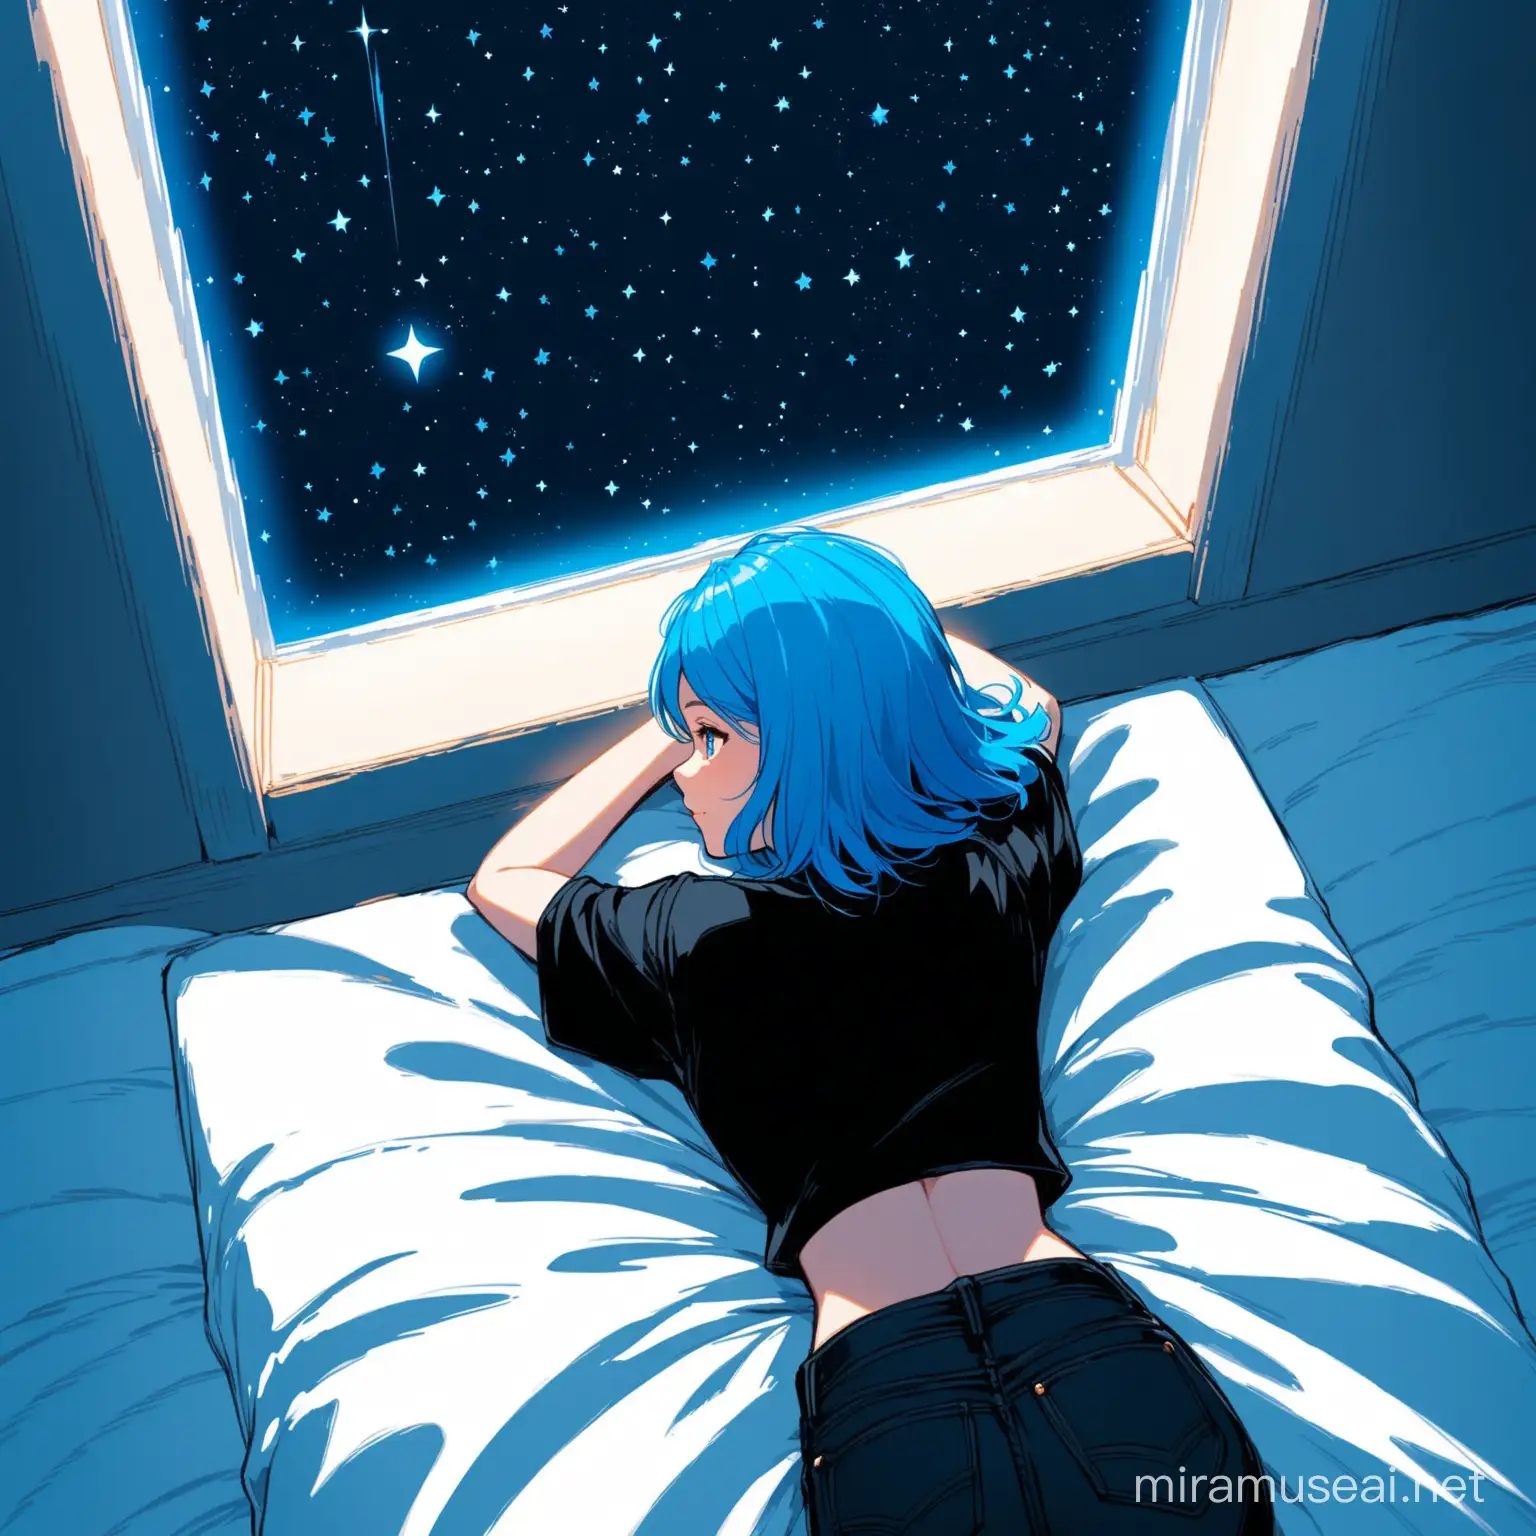 Dreamy Girl with Vibrant Blue Hair Stargazing on Bed